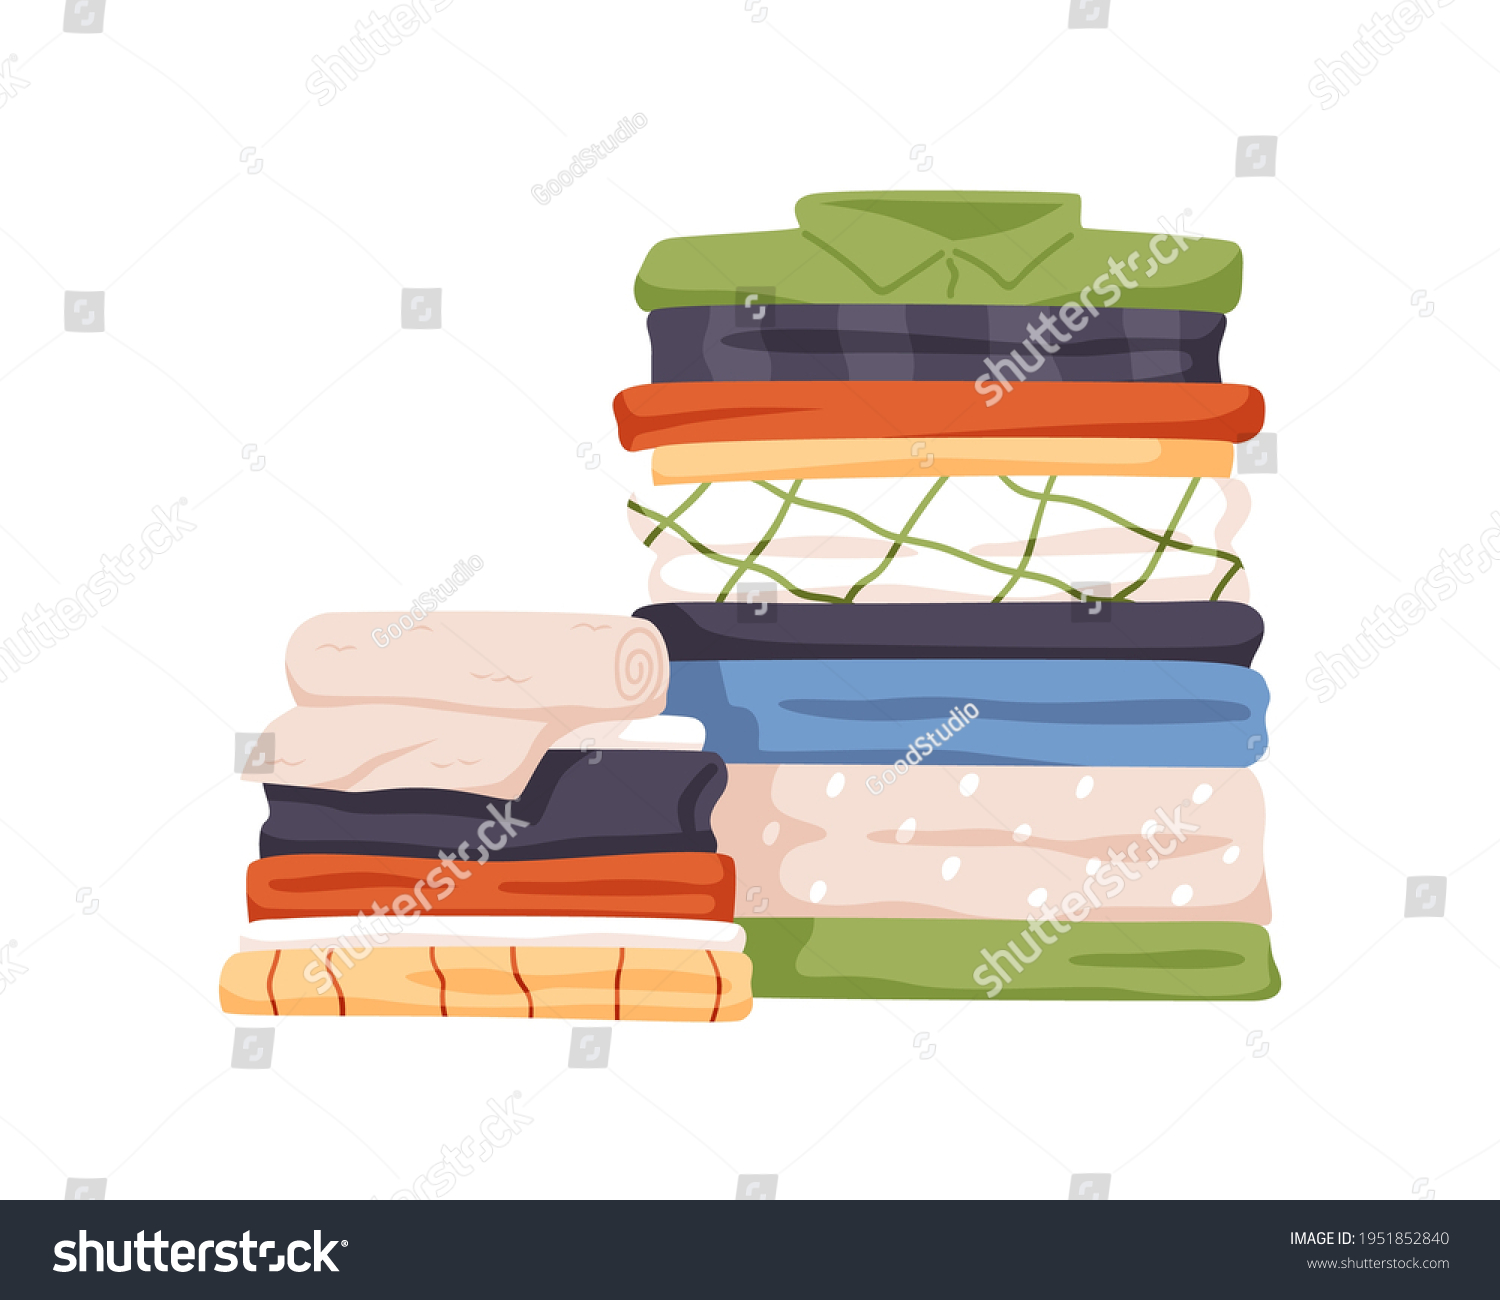 Stack of neat and clean clothes. Pile of neatly folded shirts, tshirts, jeans, trousers, pants and bath towels. Flat cartoon vector illustration isolated on white background #1951852840